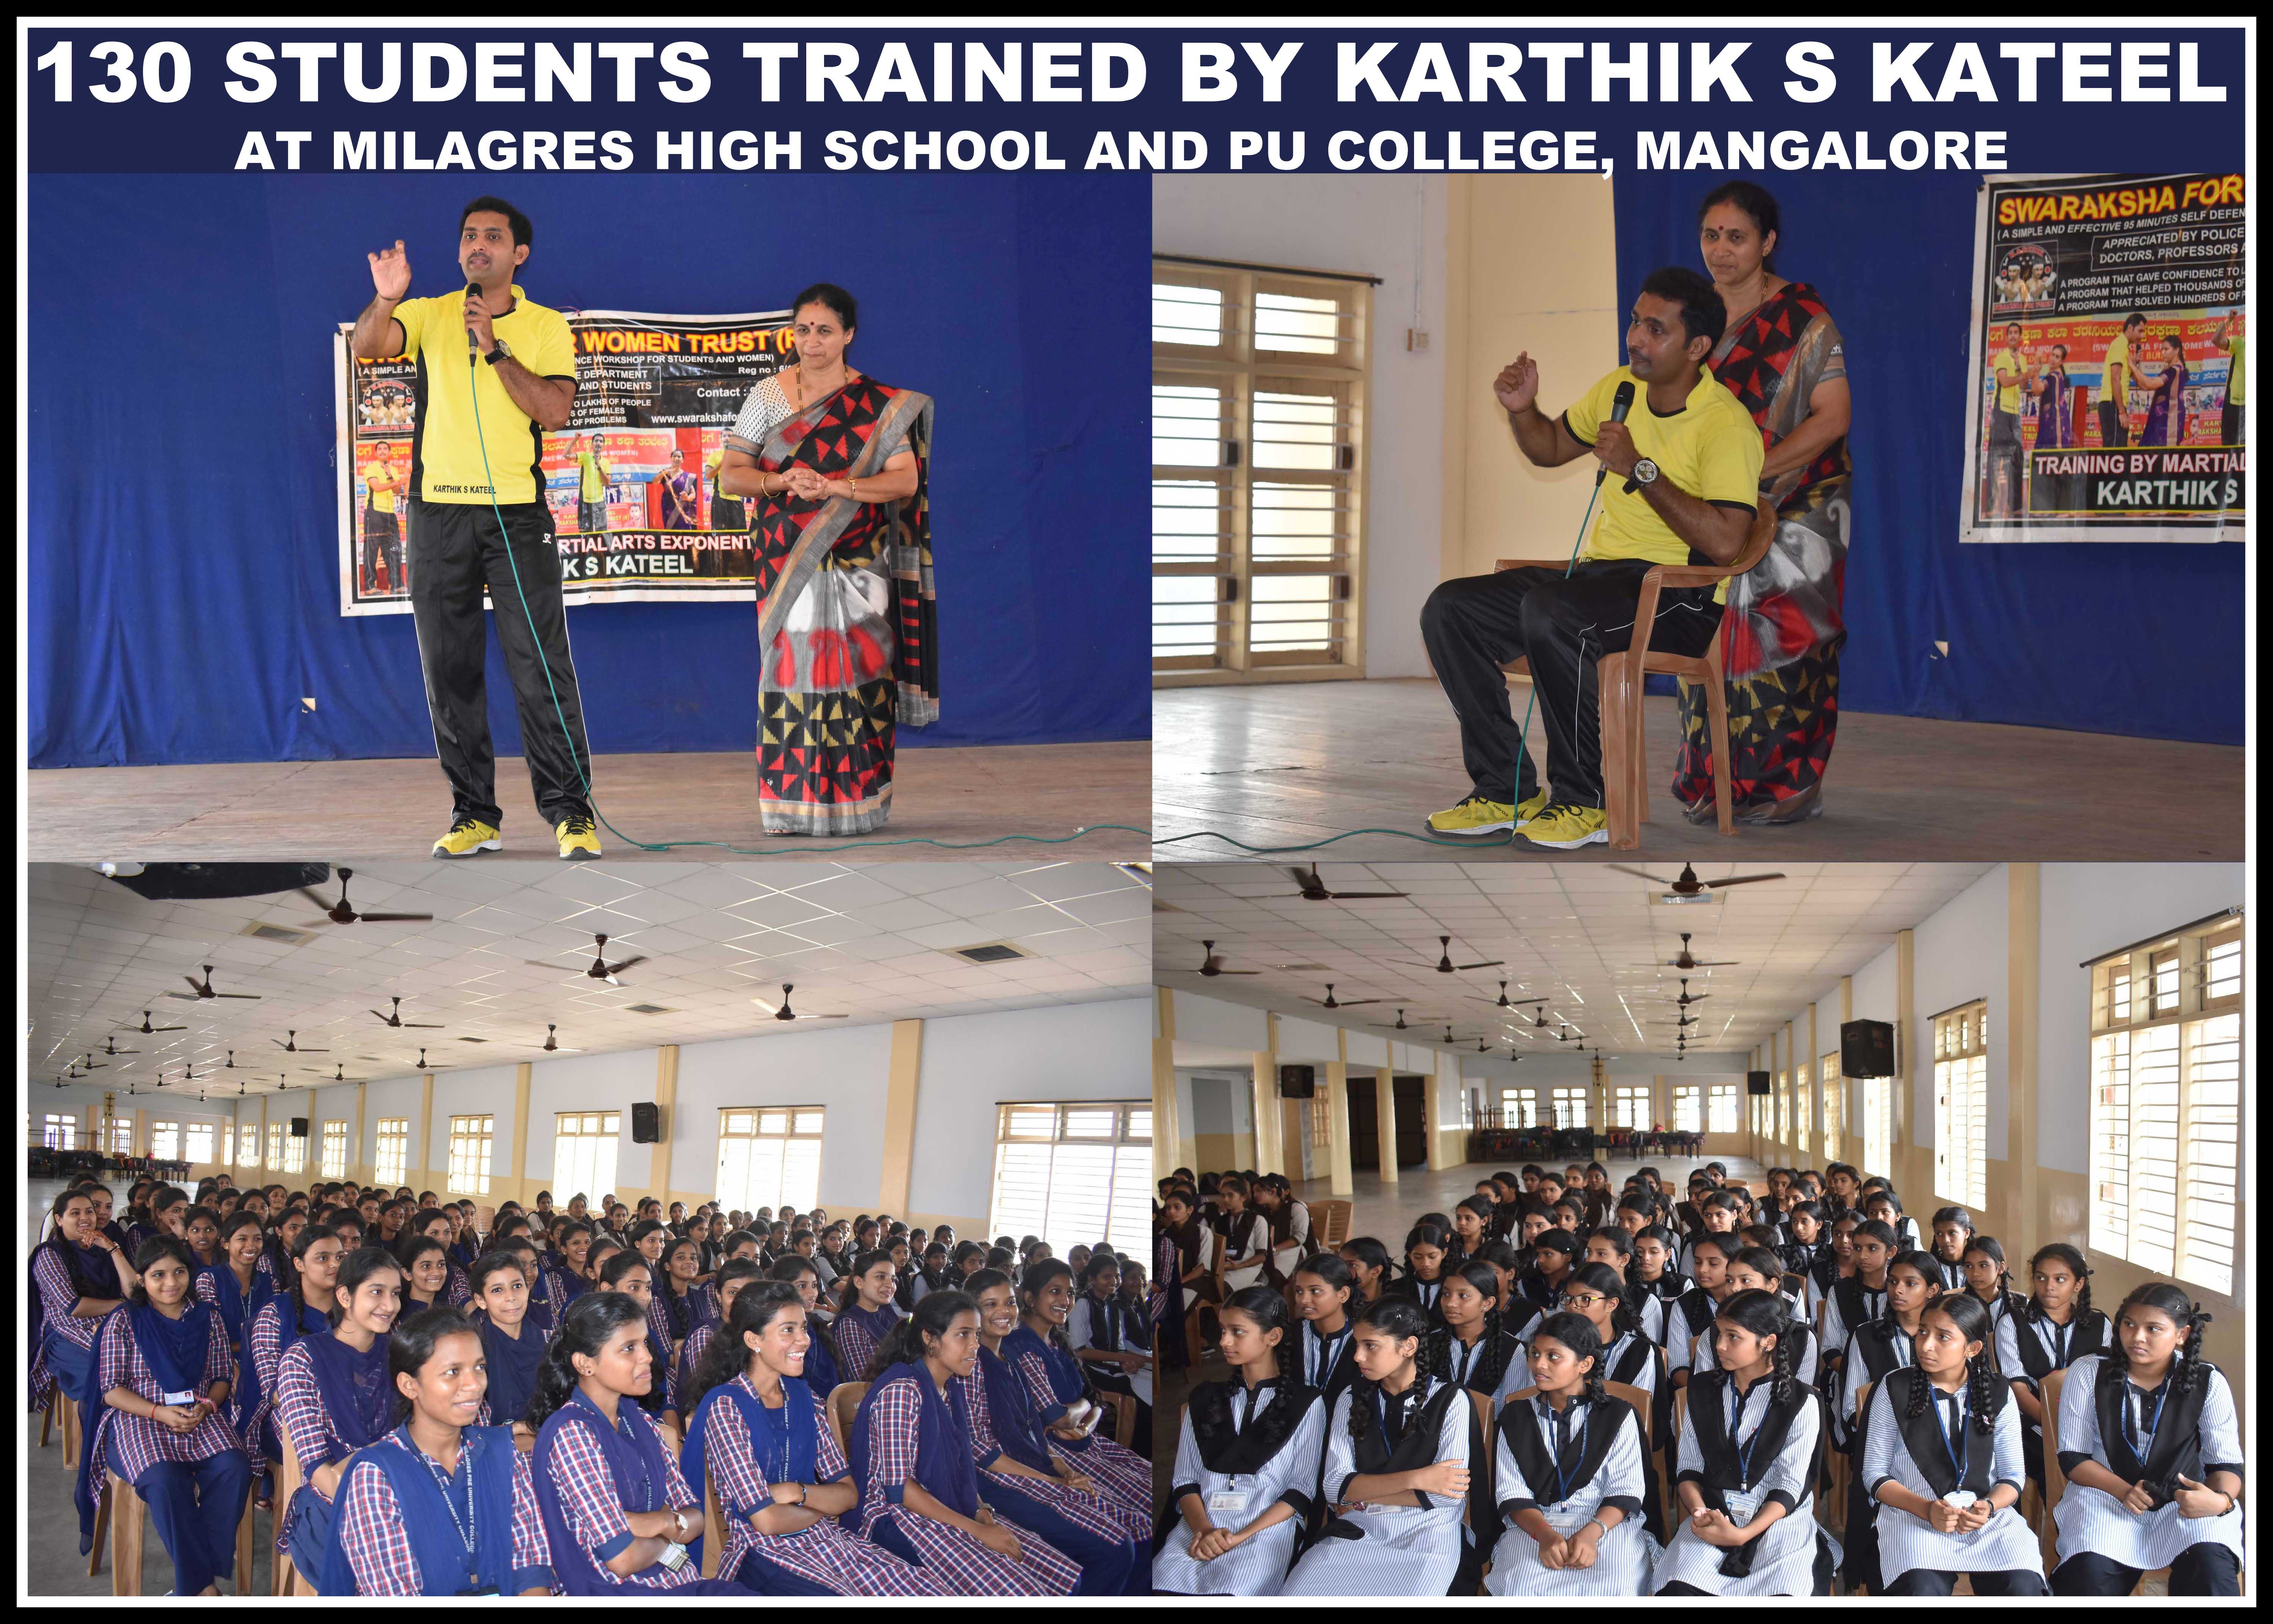 STUDENTS TRAINED BY KARTHIK S